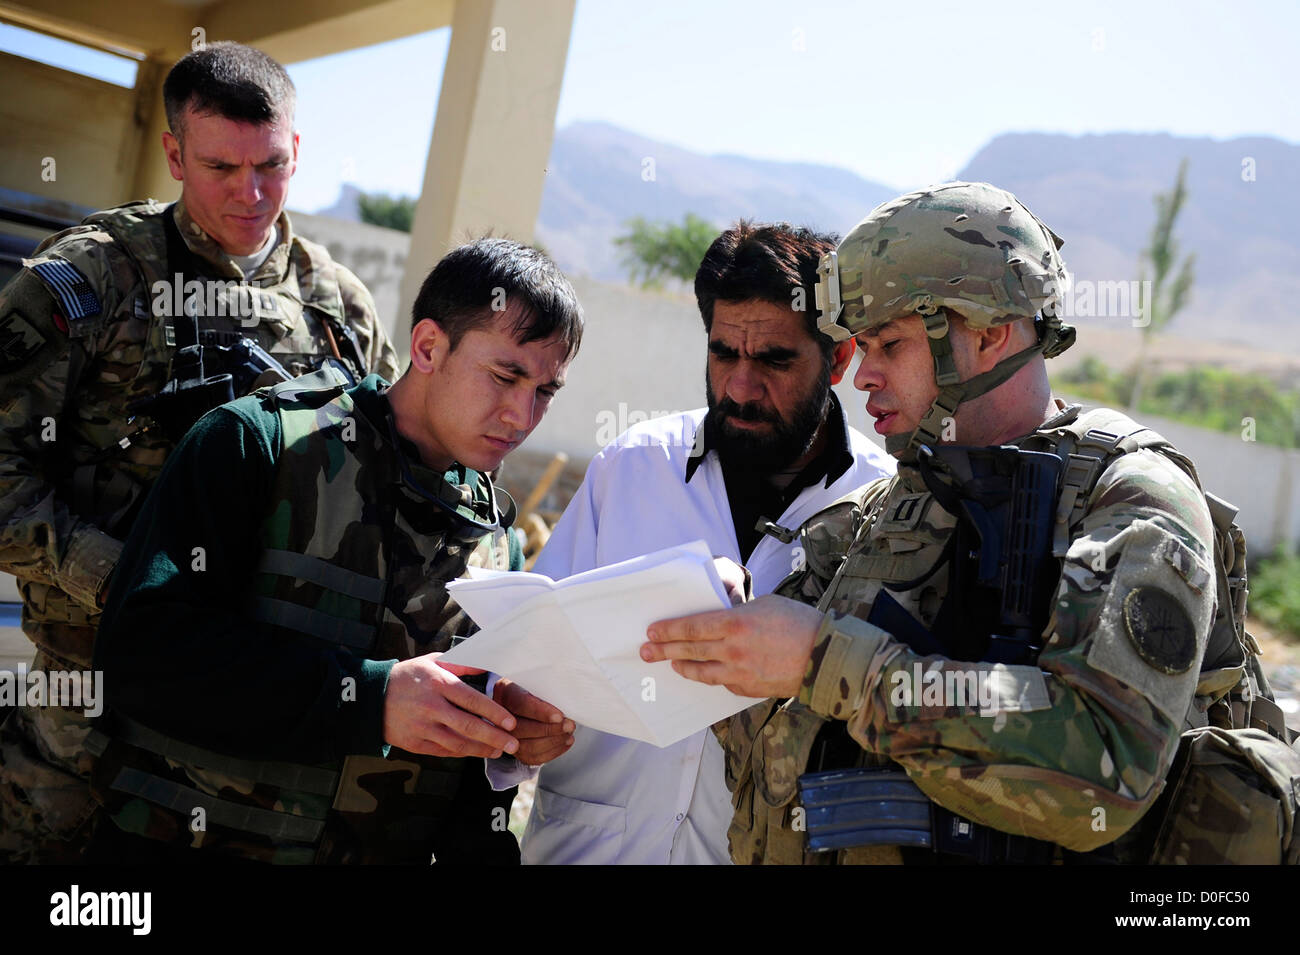 A US Navy engineer and a Navy physician's assistant go over design plans with a local doctor September 26, 2012 during a mission to Pur Chaman district, Farah province, Afghanistan. The mission marks the first time coalition forces have been to the Pur Chaman district in over a year. Stock Photo